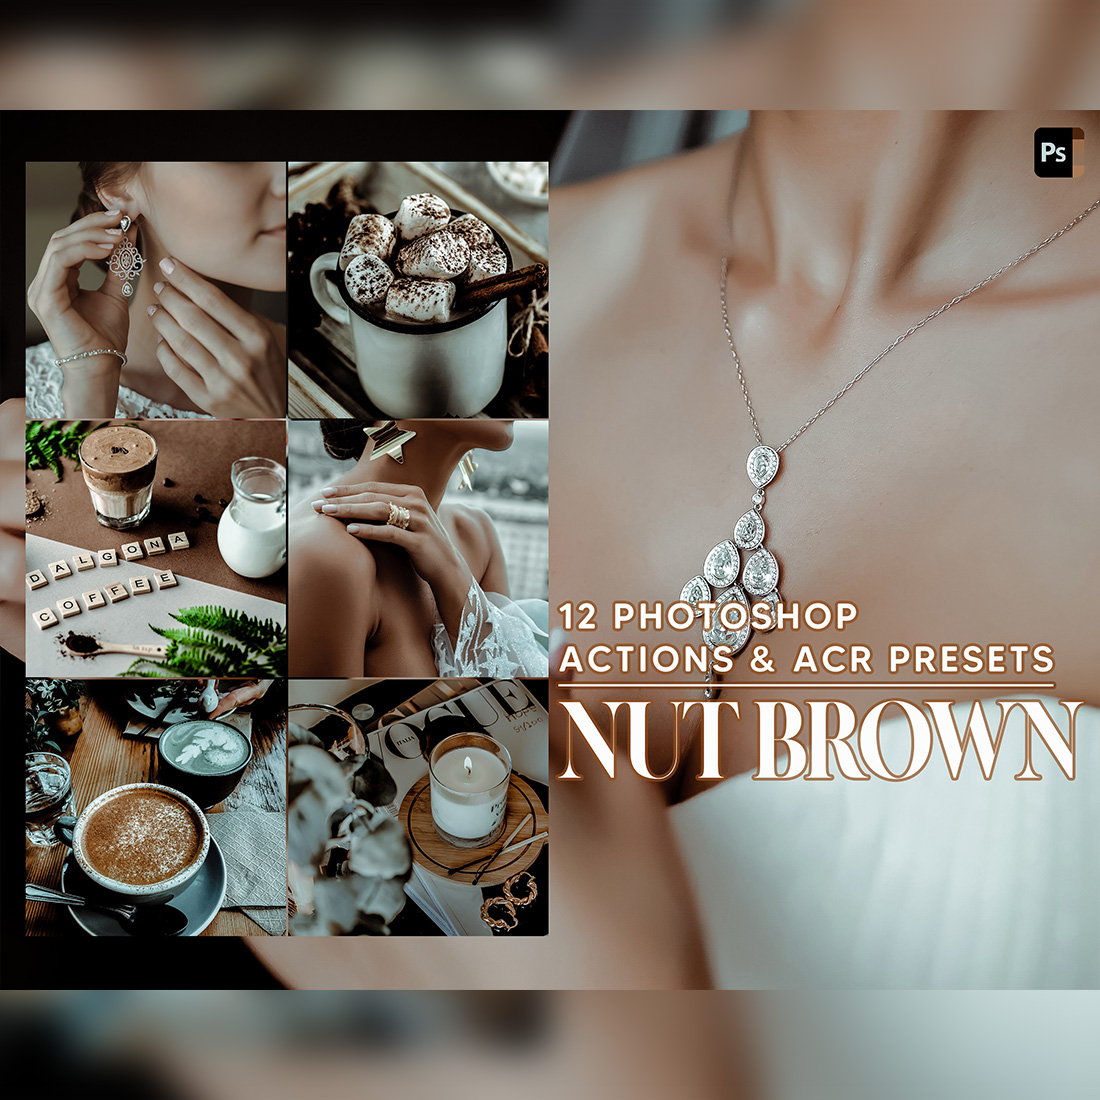 12 Photoshop Actions, Nut Brown Ps Action, Close Up ACR Preset, Moody Brown Ps Filter, Portrait And Lifestyle Theme For Instagram, Blogger cover image.